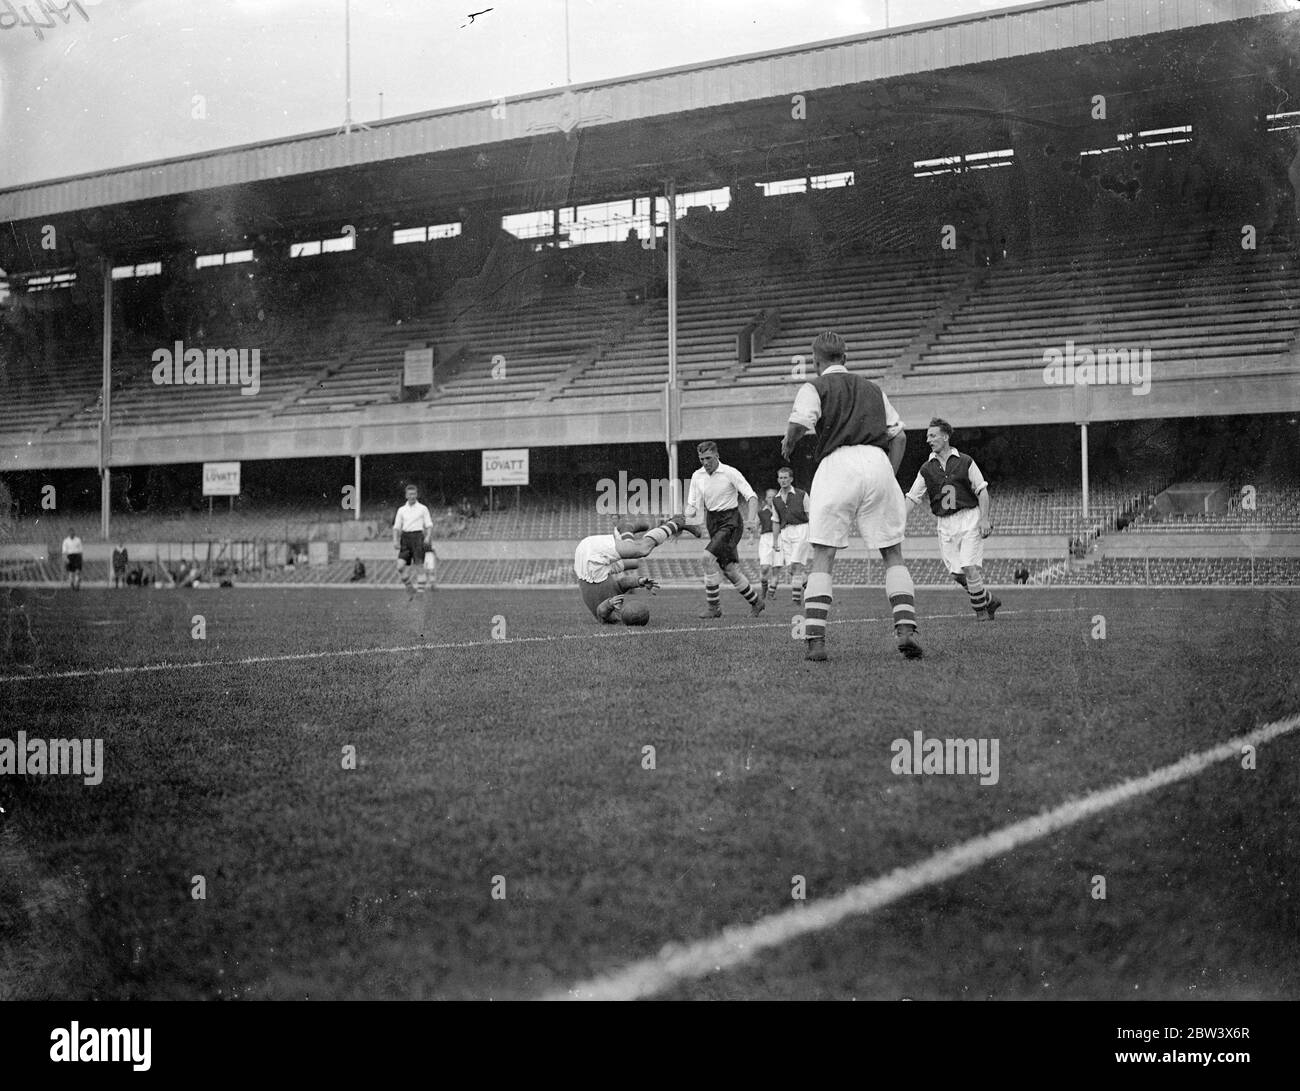 He does it on his heal ! . Reds met Whites in an Arsenal trial match at Highbury . Photo shows , Alex Wilson the ' reds ' goalkeeper , gives a ' gymnastic display ' when making a save . 22 August 1936 Original caption from negative Stock Photo